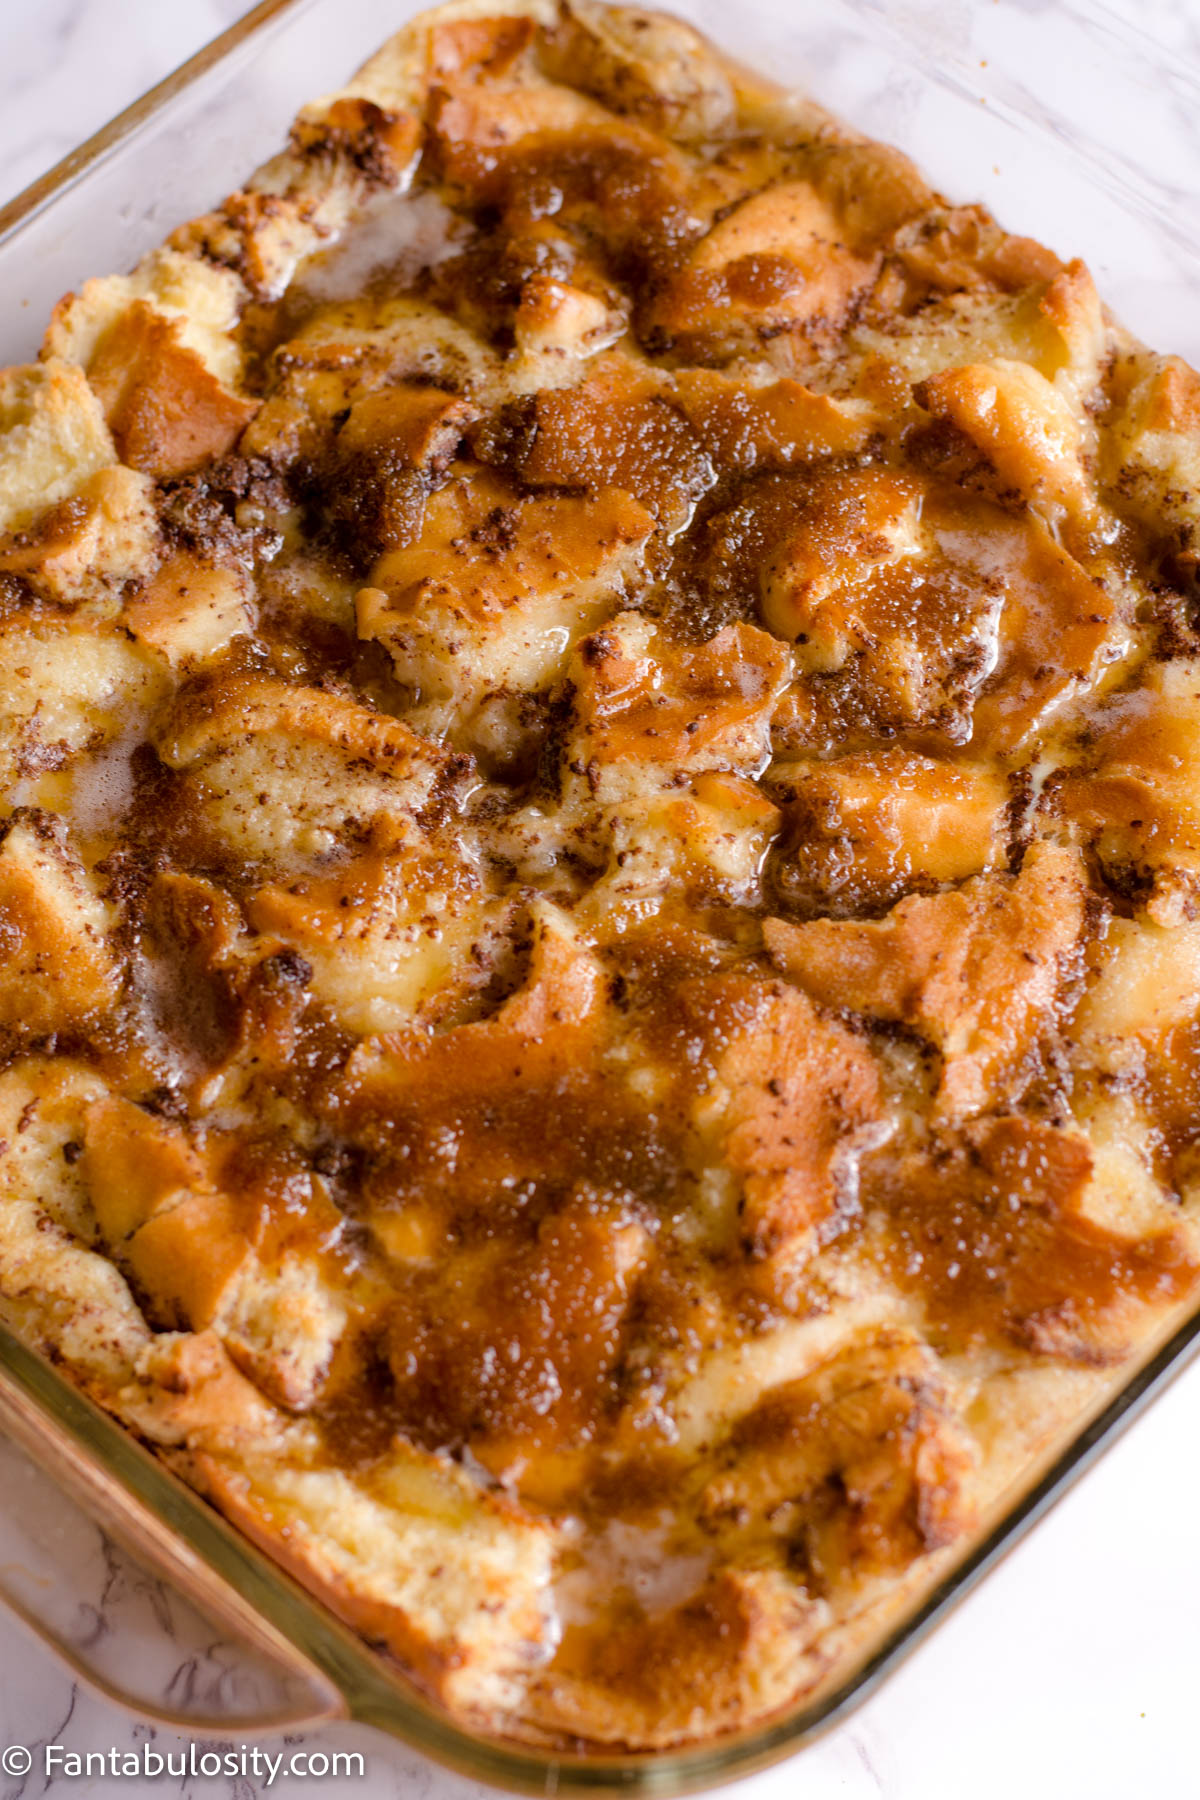 Baking dish full of cooked bread pudding.